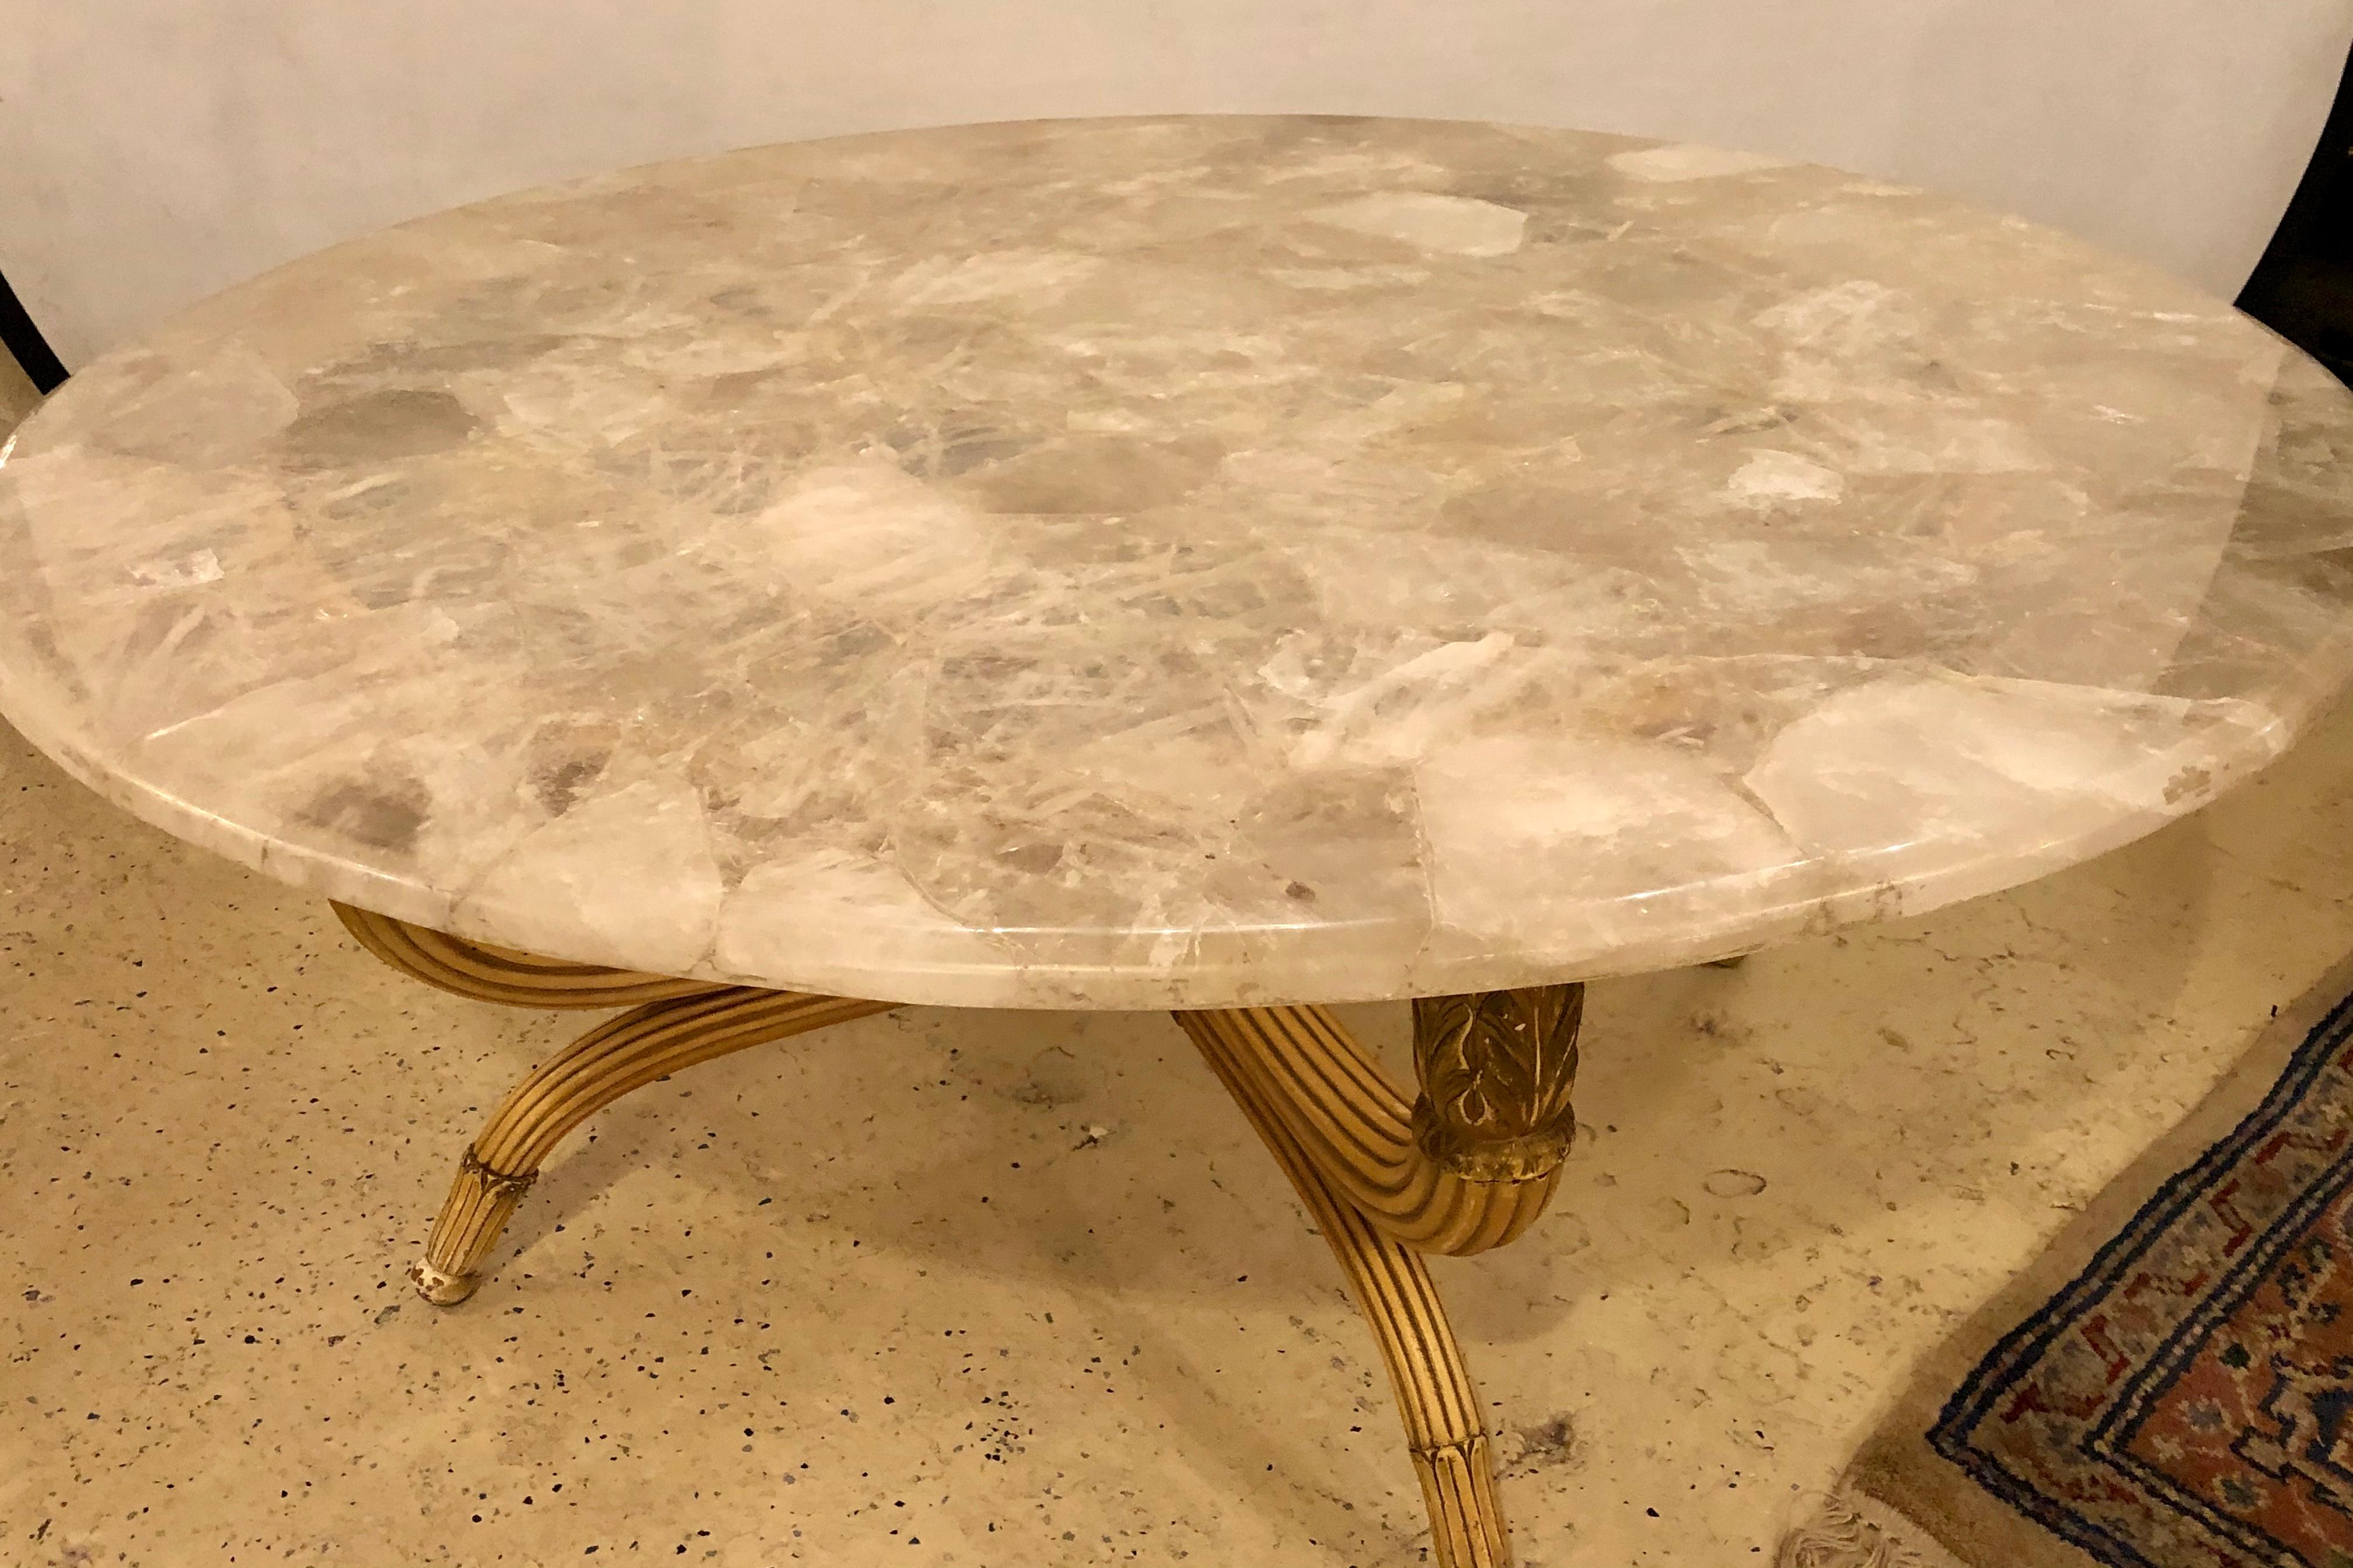 A solid rock crystal circular table top that can be made into a coffee, dining or centre table. One simply needs a base to depict this stunning one of a kind 48 inch table top of circular form in a sold white rock crystal. The top here seen with a